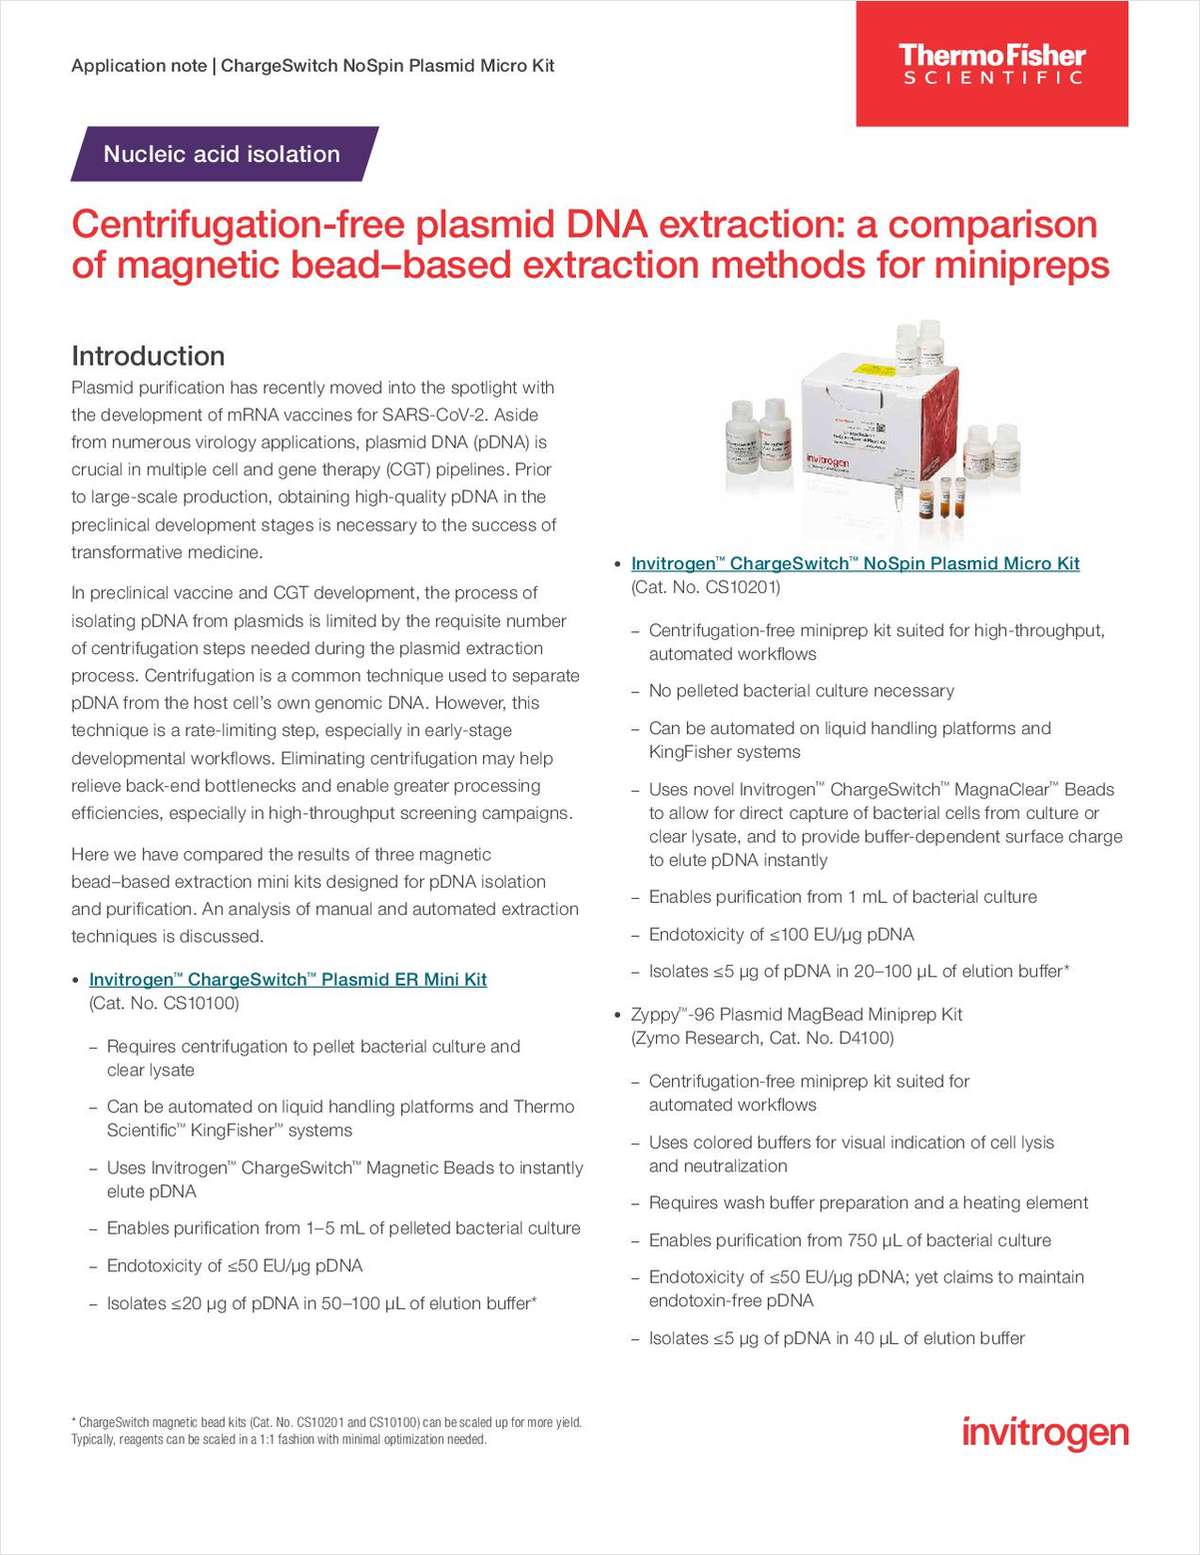 Centrifugation-Free Plasmid DNA Extraction: A Comparison of Magnetic Bead-Based Extraction Methods for Minipreps